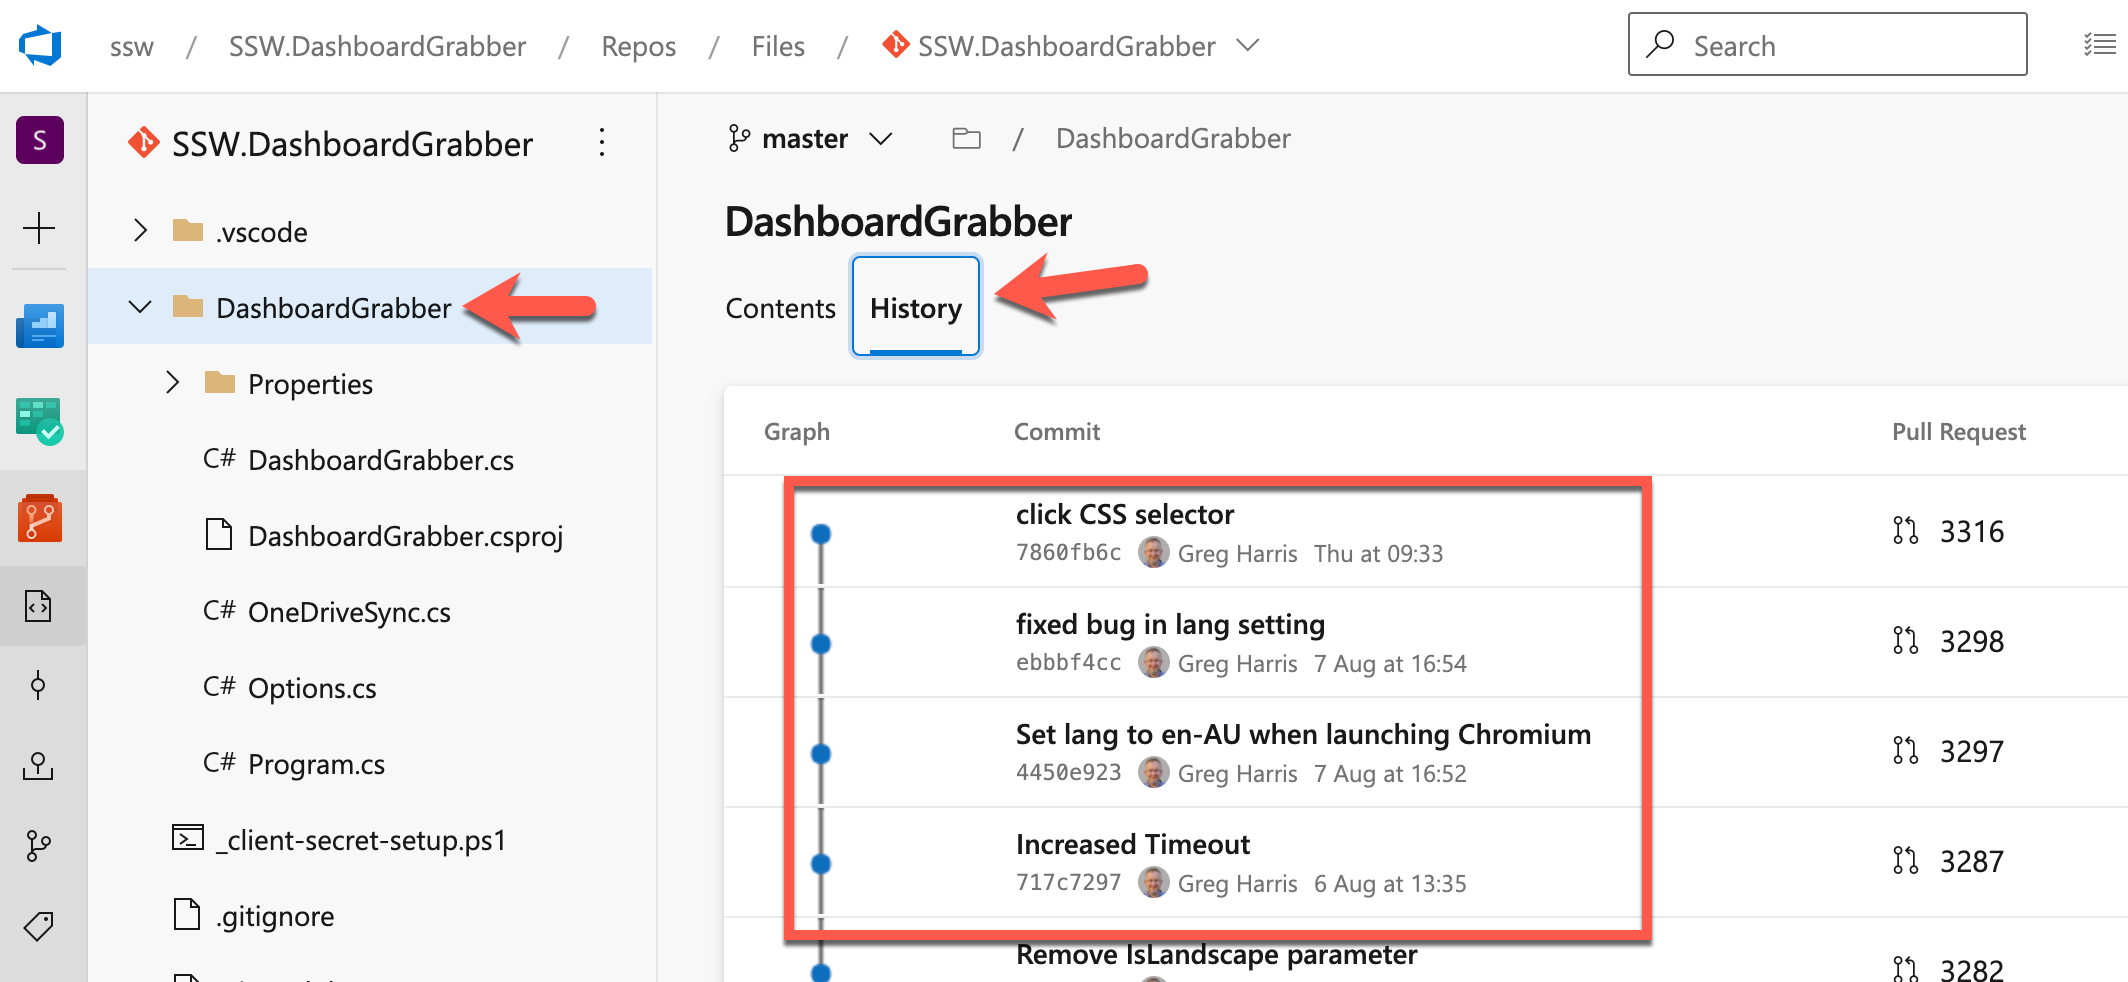 In Azure DevOps you can see the history of commits for a specific folder